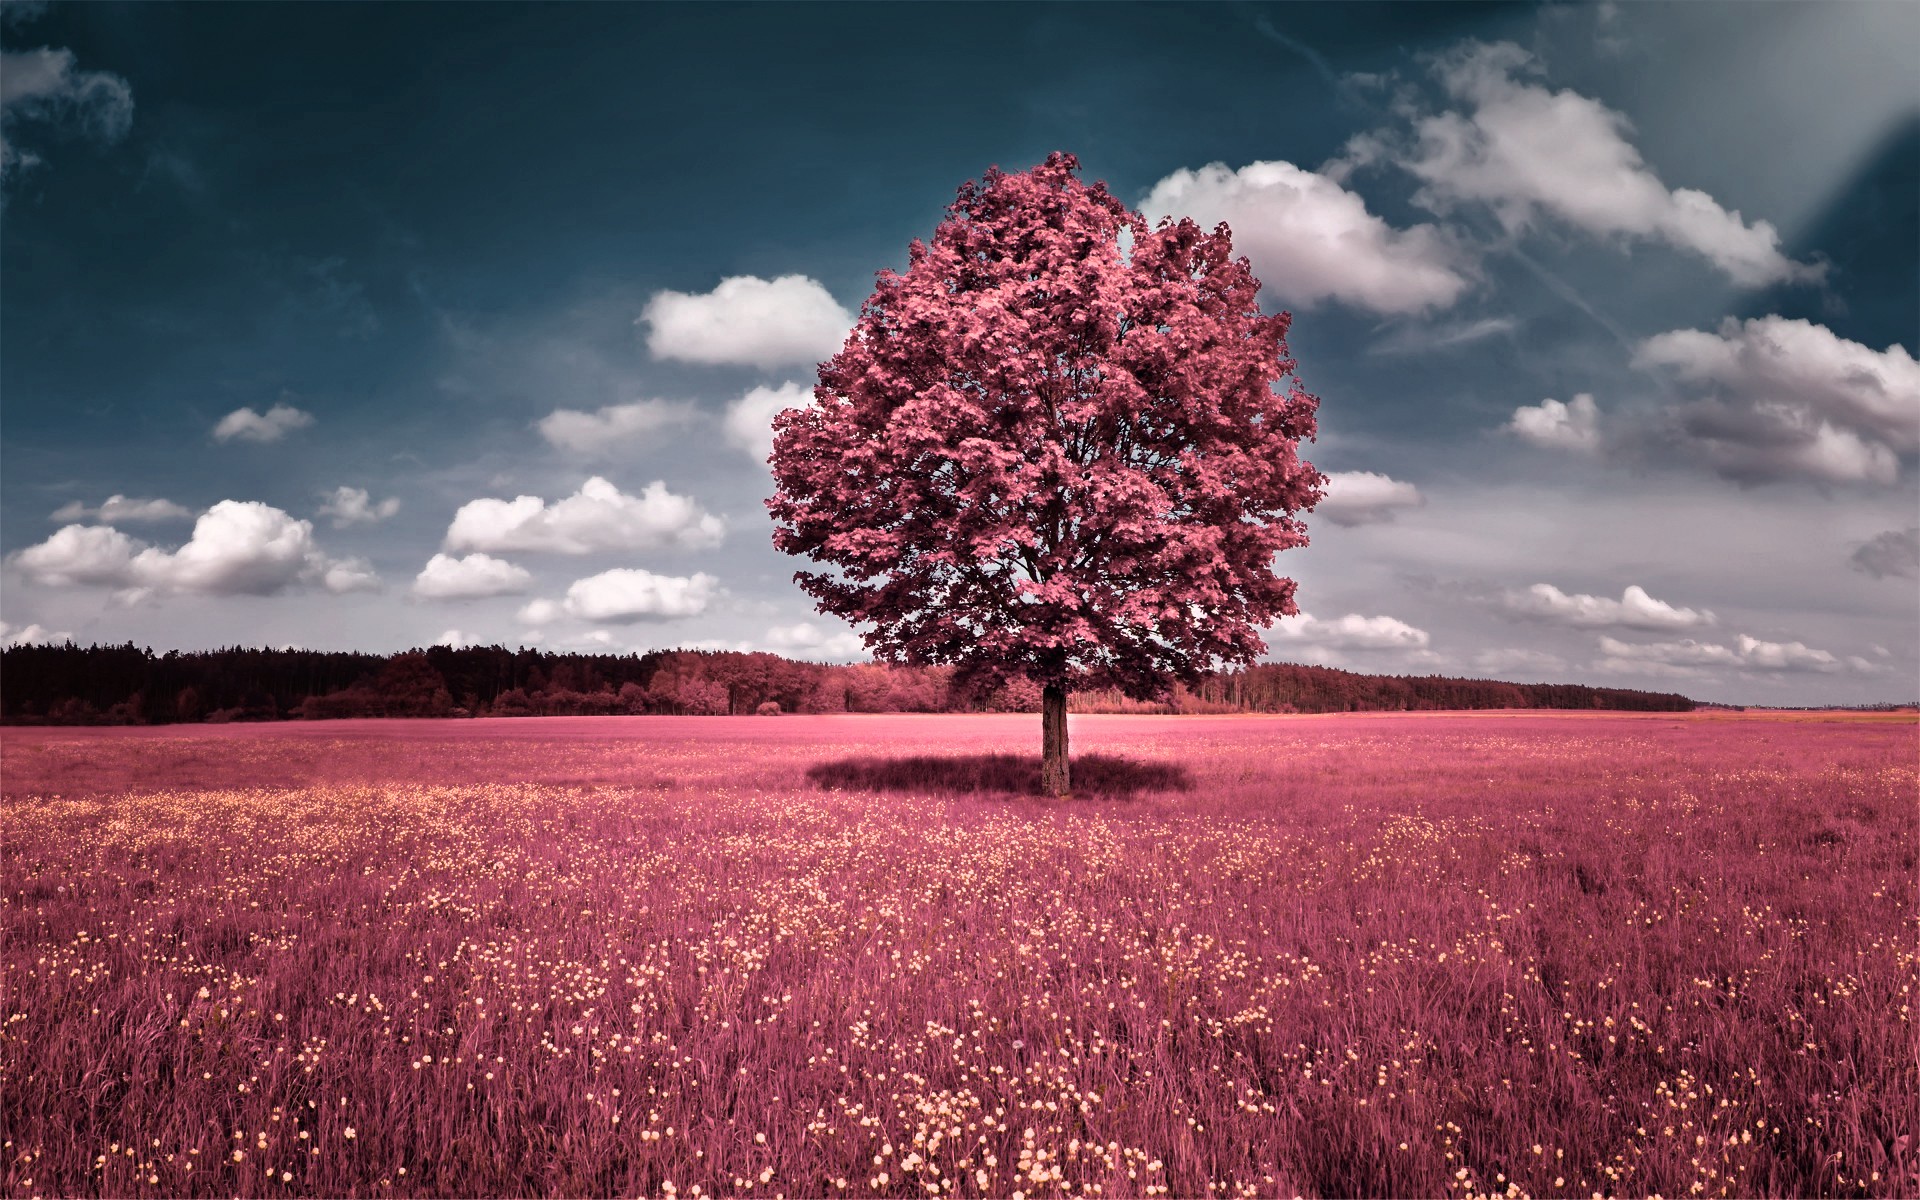 clouds, landscapes, trees, flowers, pink, grass, fields, hills, skyscapes, photo manipulations - desktop wallpaper